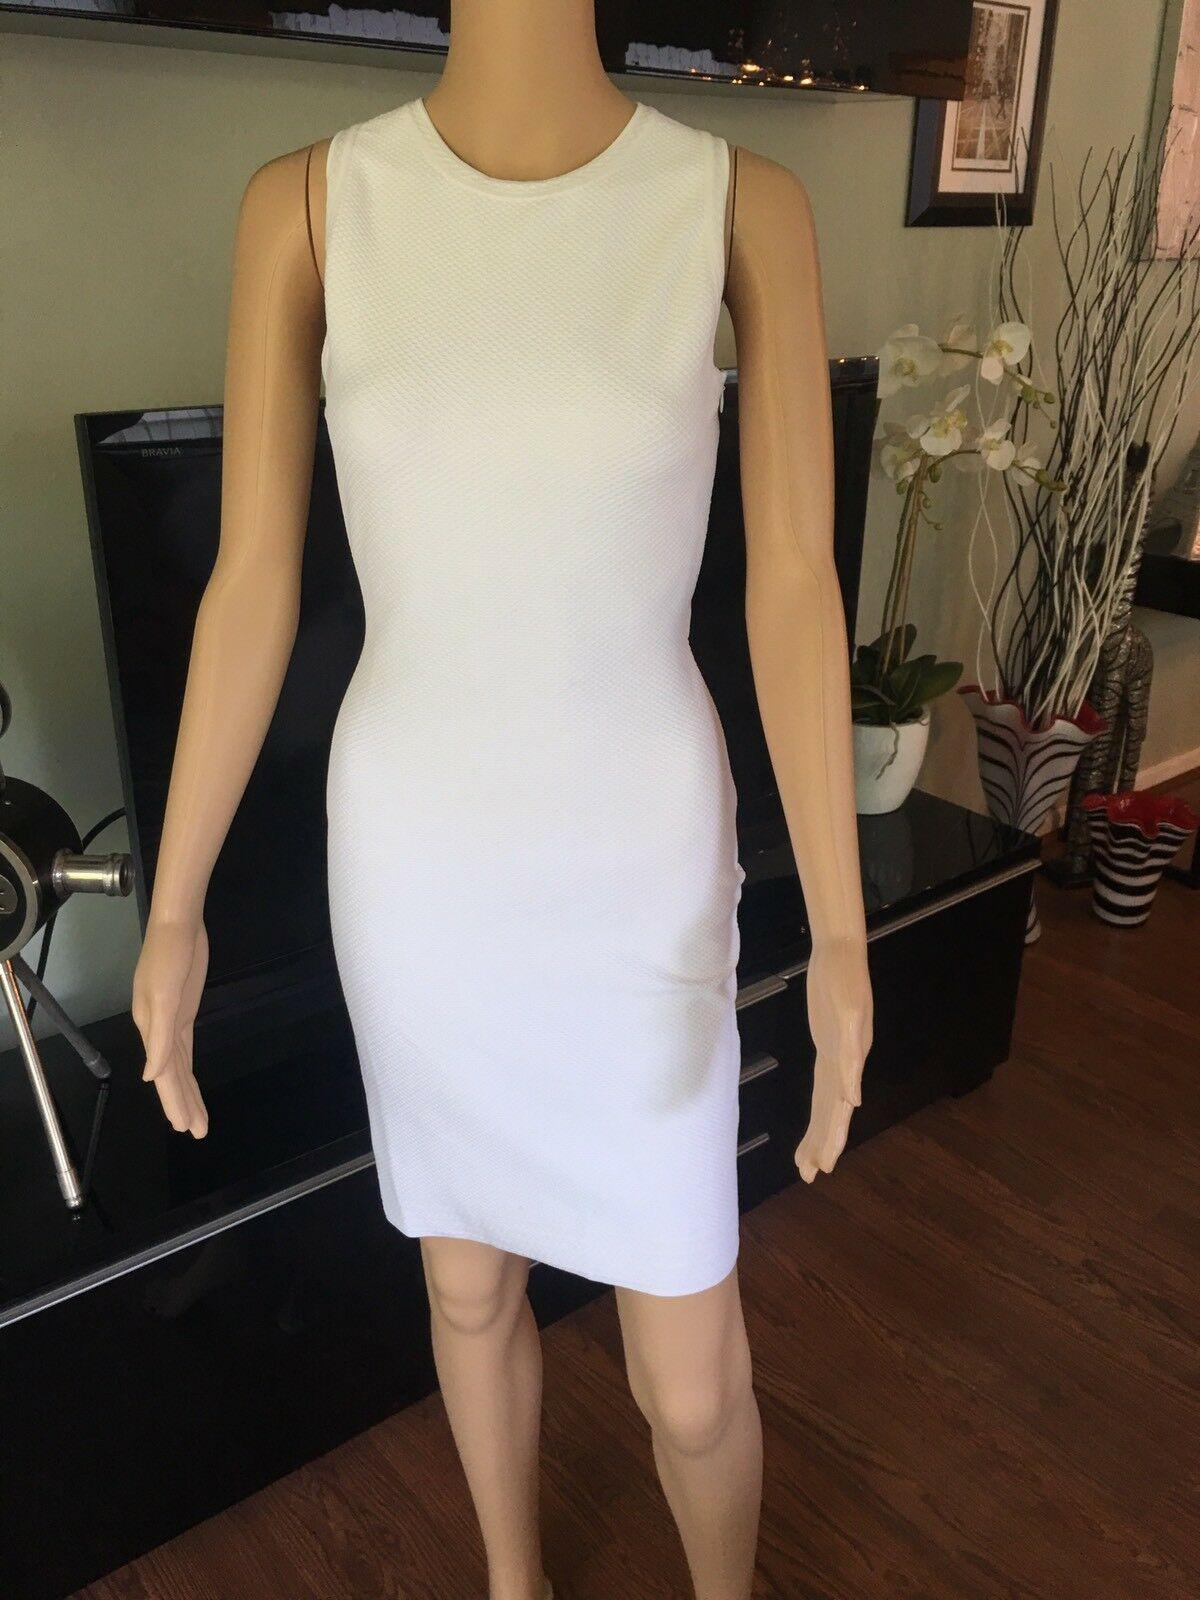 Azzedine Alaia Fitted Open Back Dress

White Alaïa sleeveless textured bodycon dress featuring scoop neckline, crossover straps at open back and concealed zip closure at side seam.

All Eyes on Alaïa

For the last half-century, the world’s most